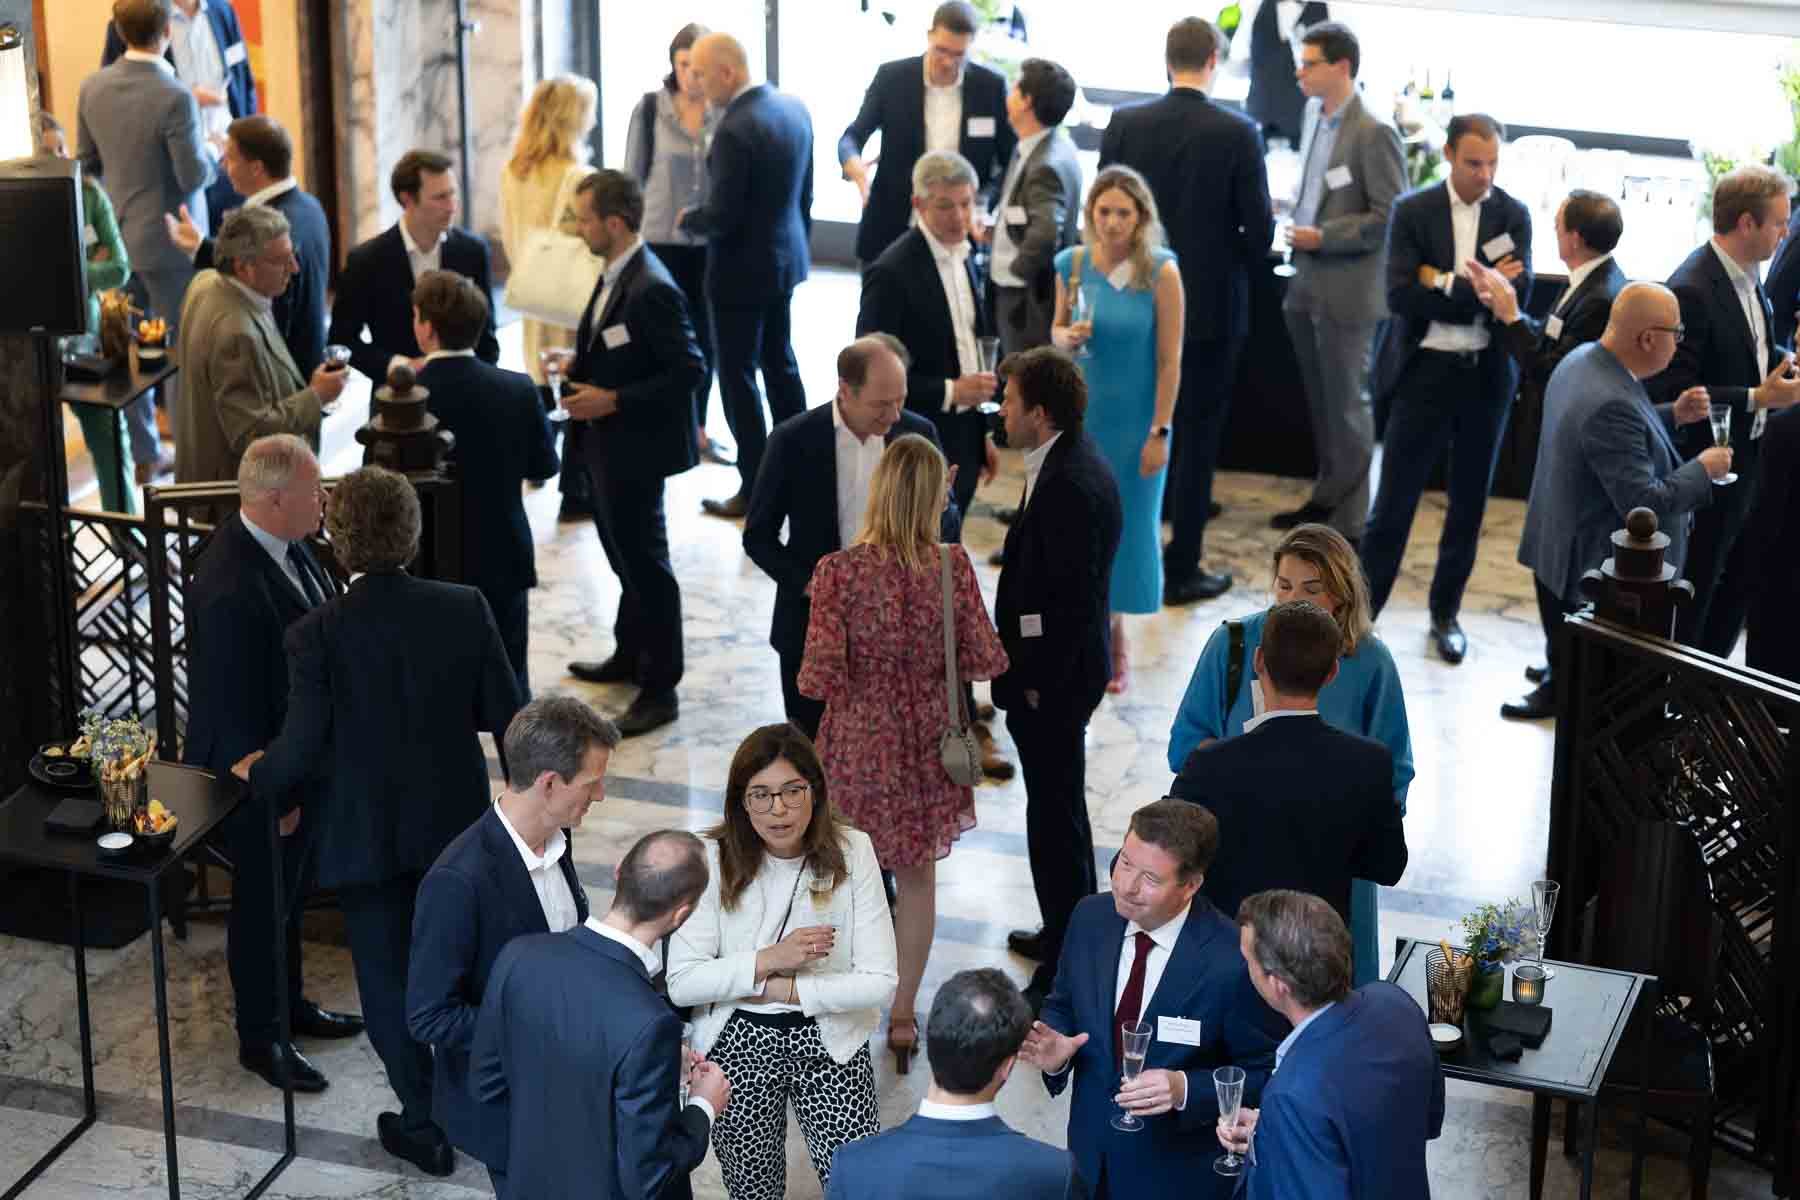  Guests mingle at a corporate reception 